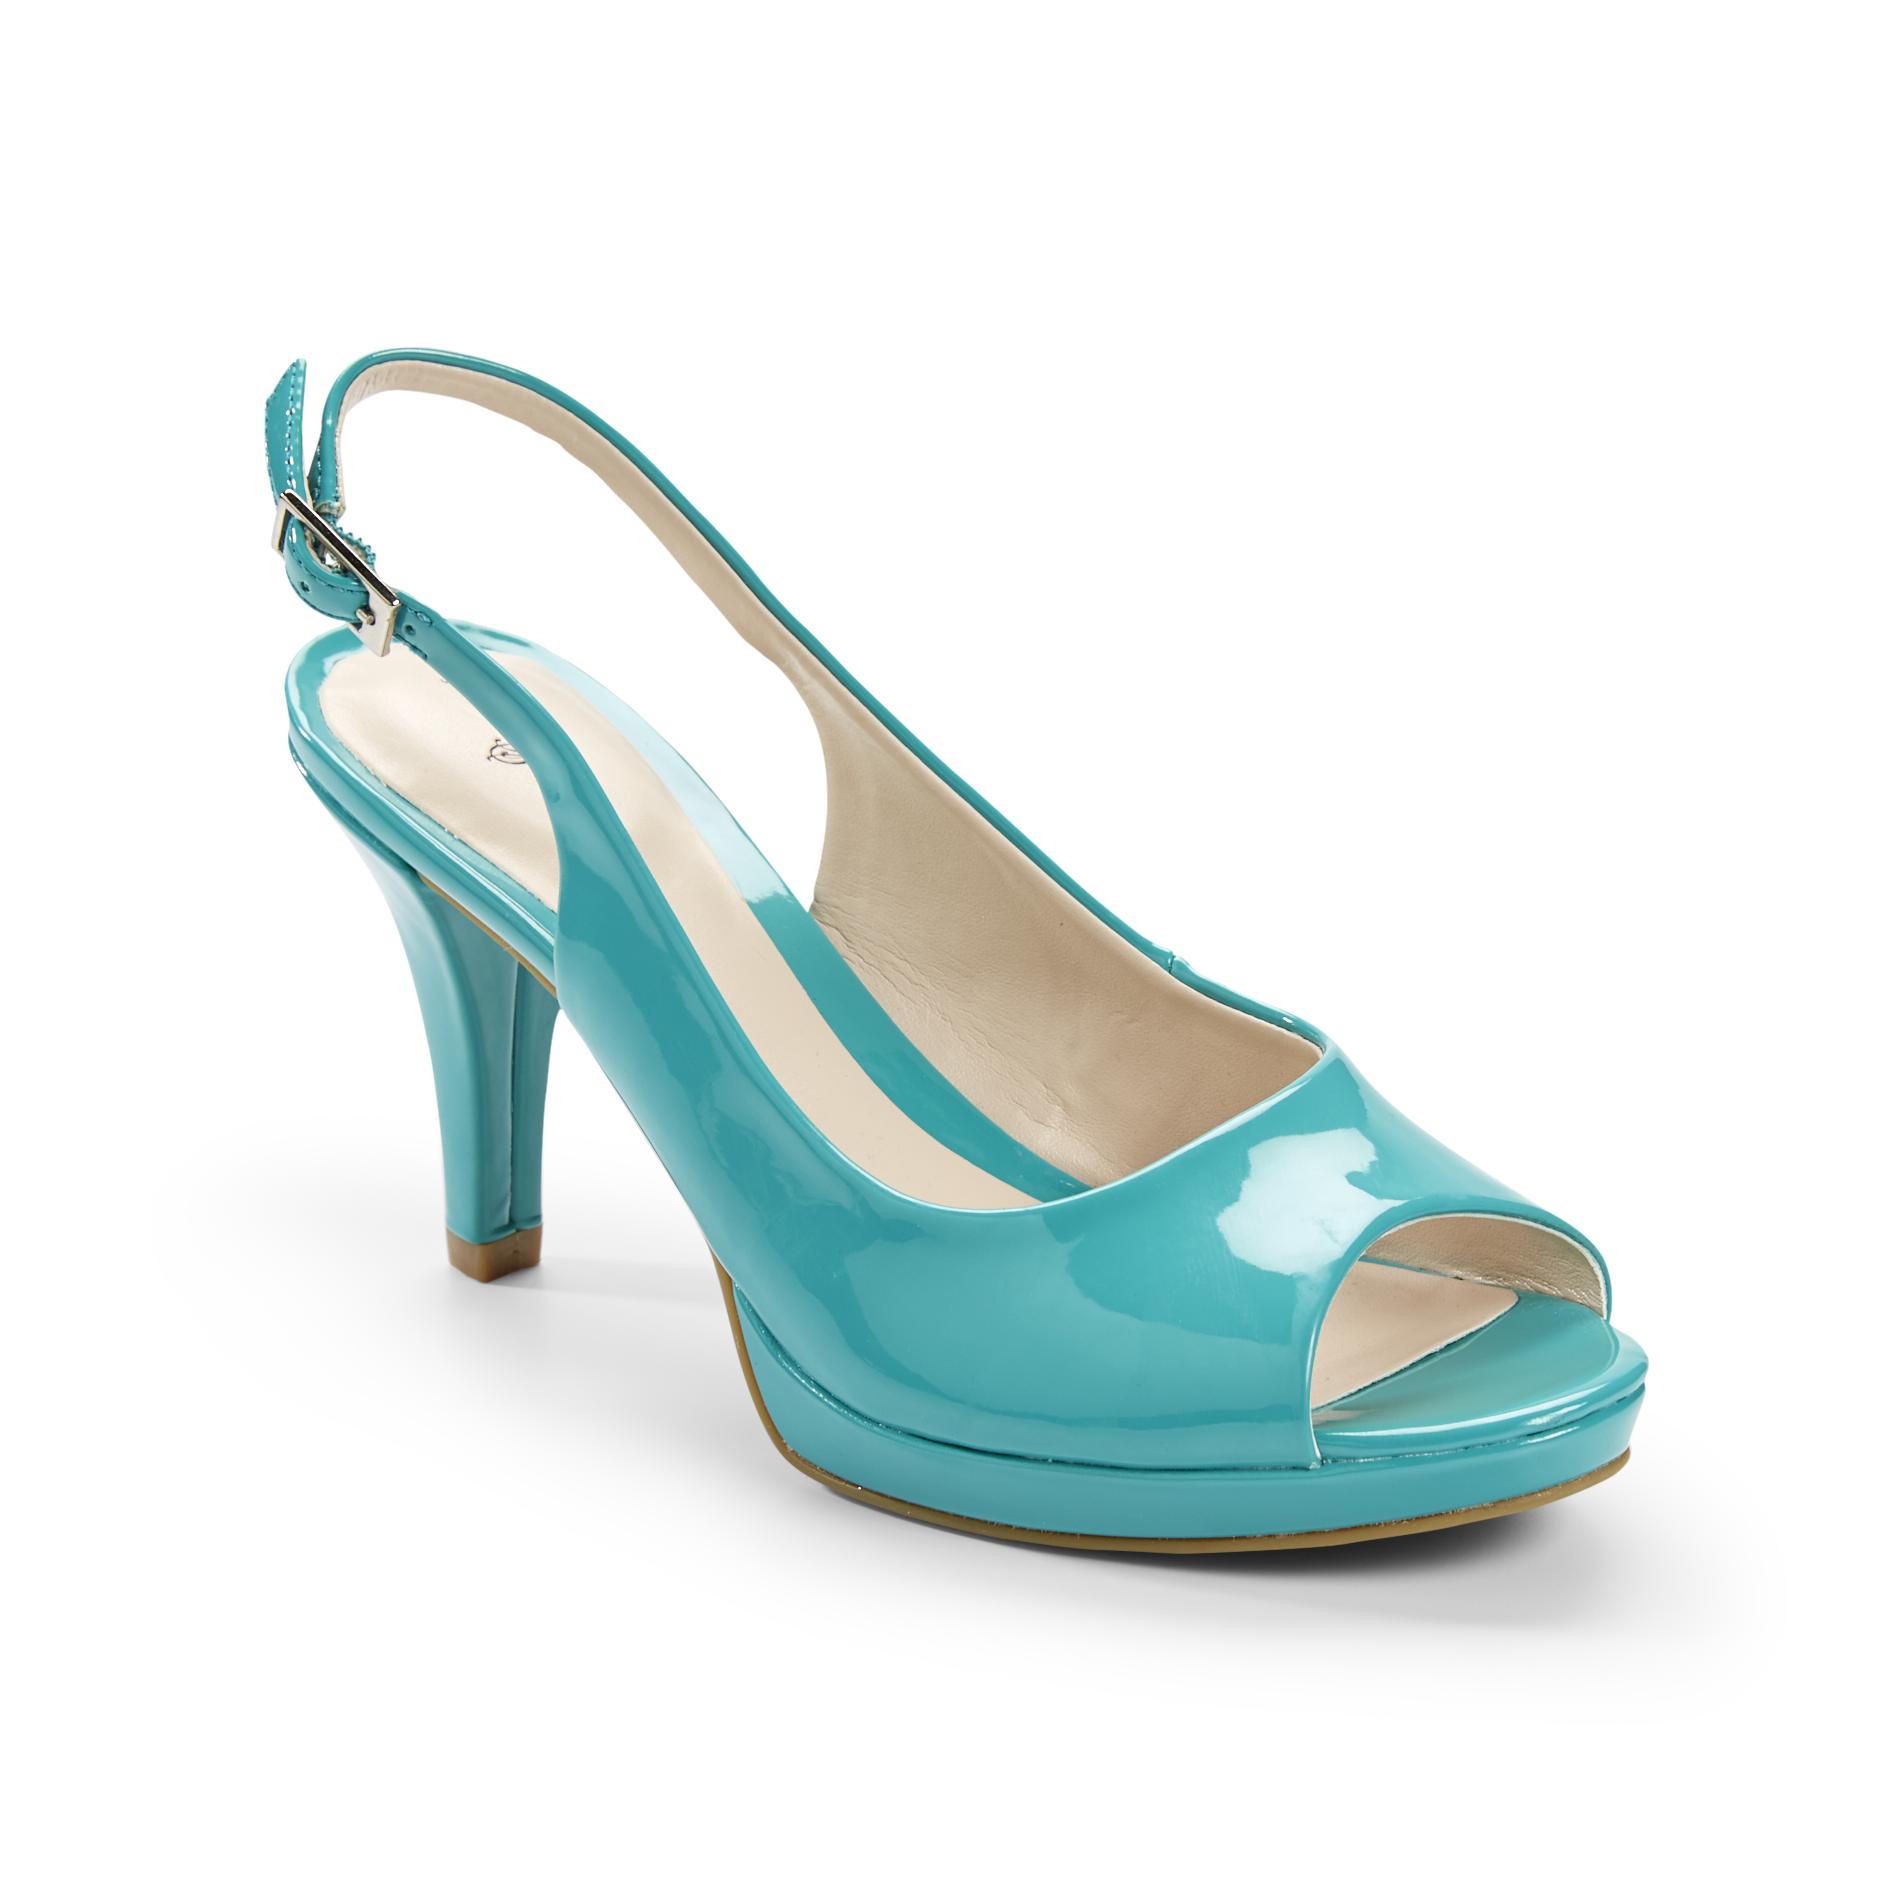 Jaclyn Smith Women's Anessa Turquoise Slingback Pump